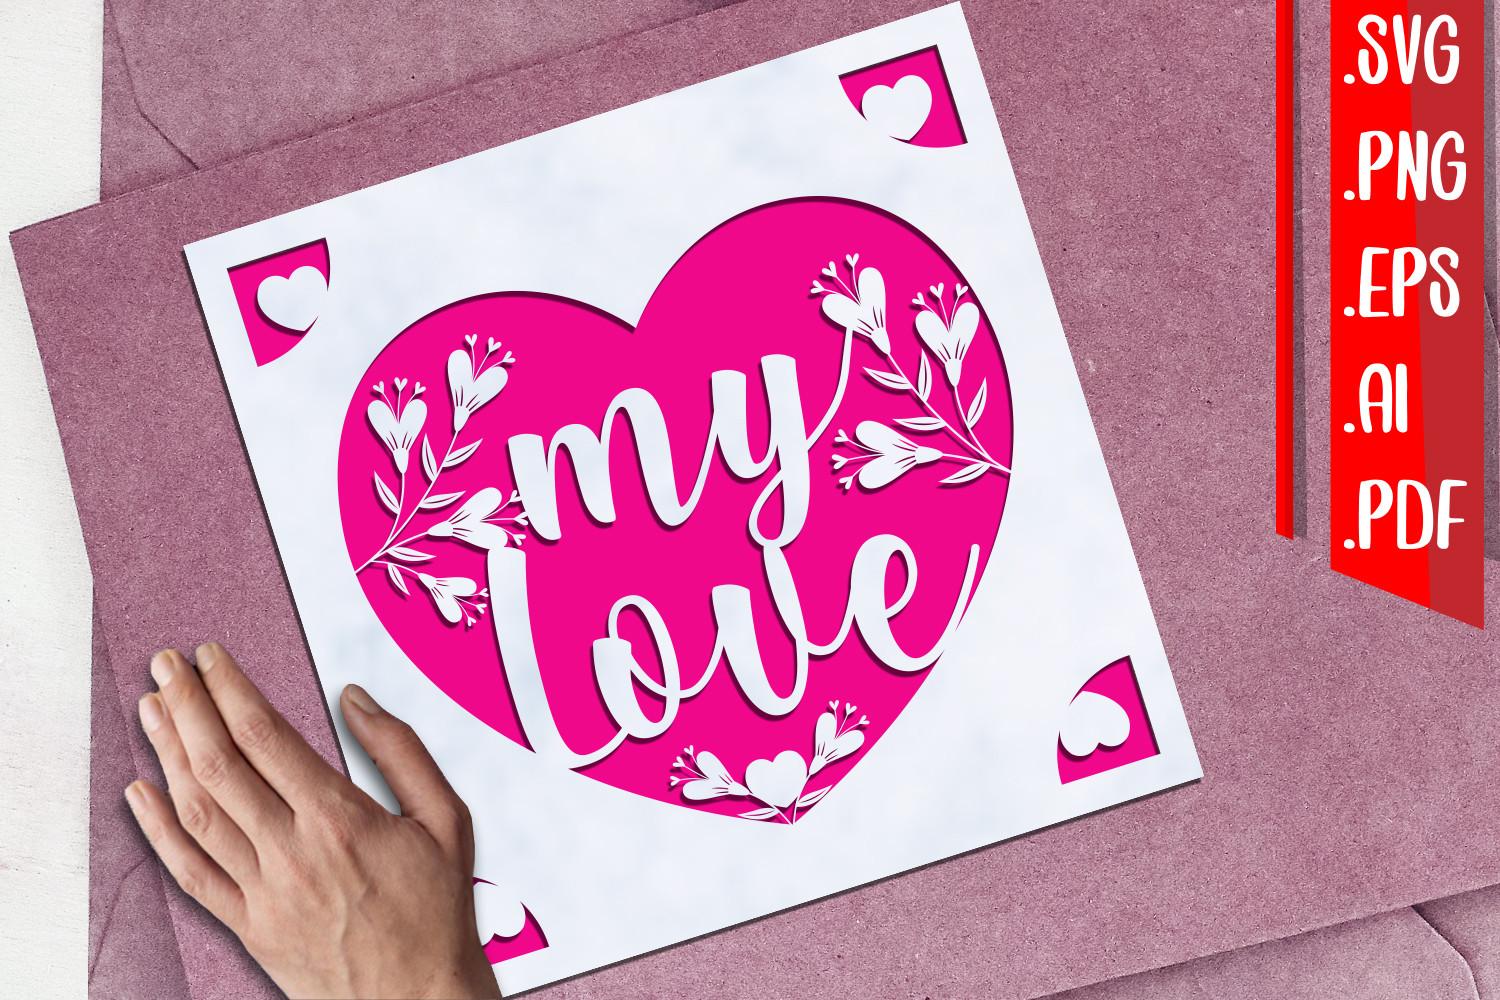 My Love Cards Svg Eps Png Ai Pdf